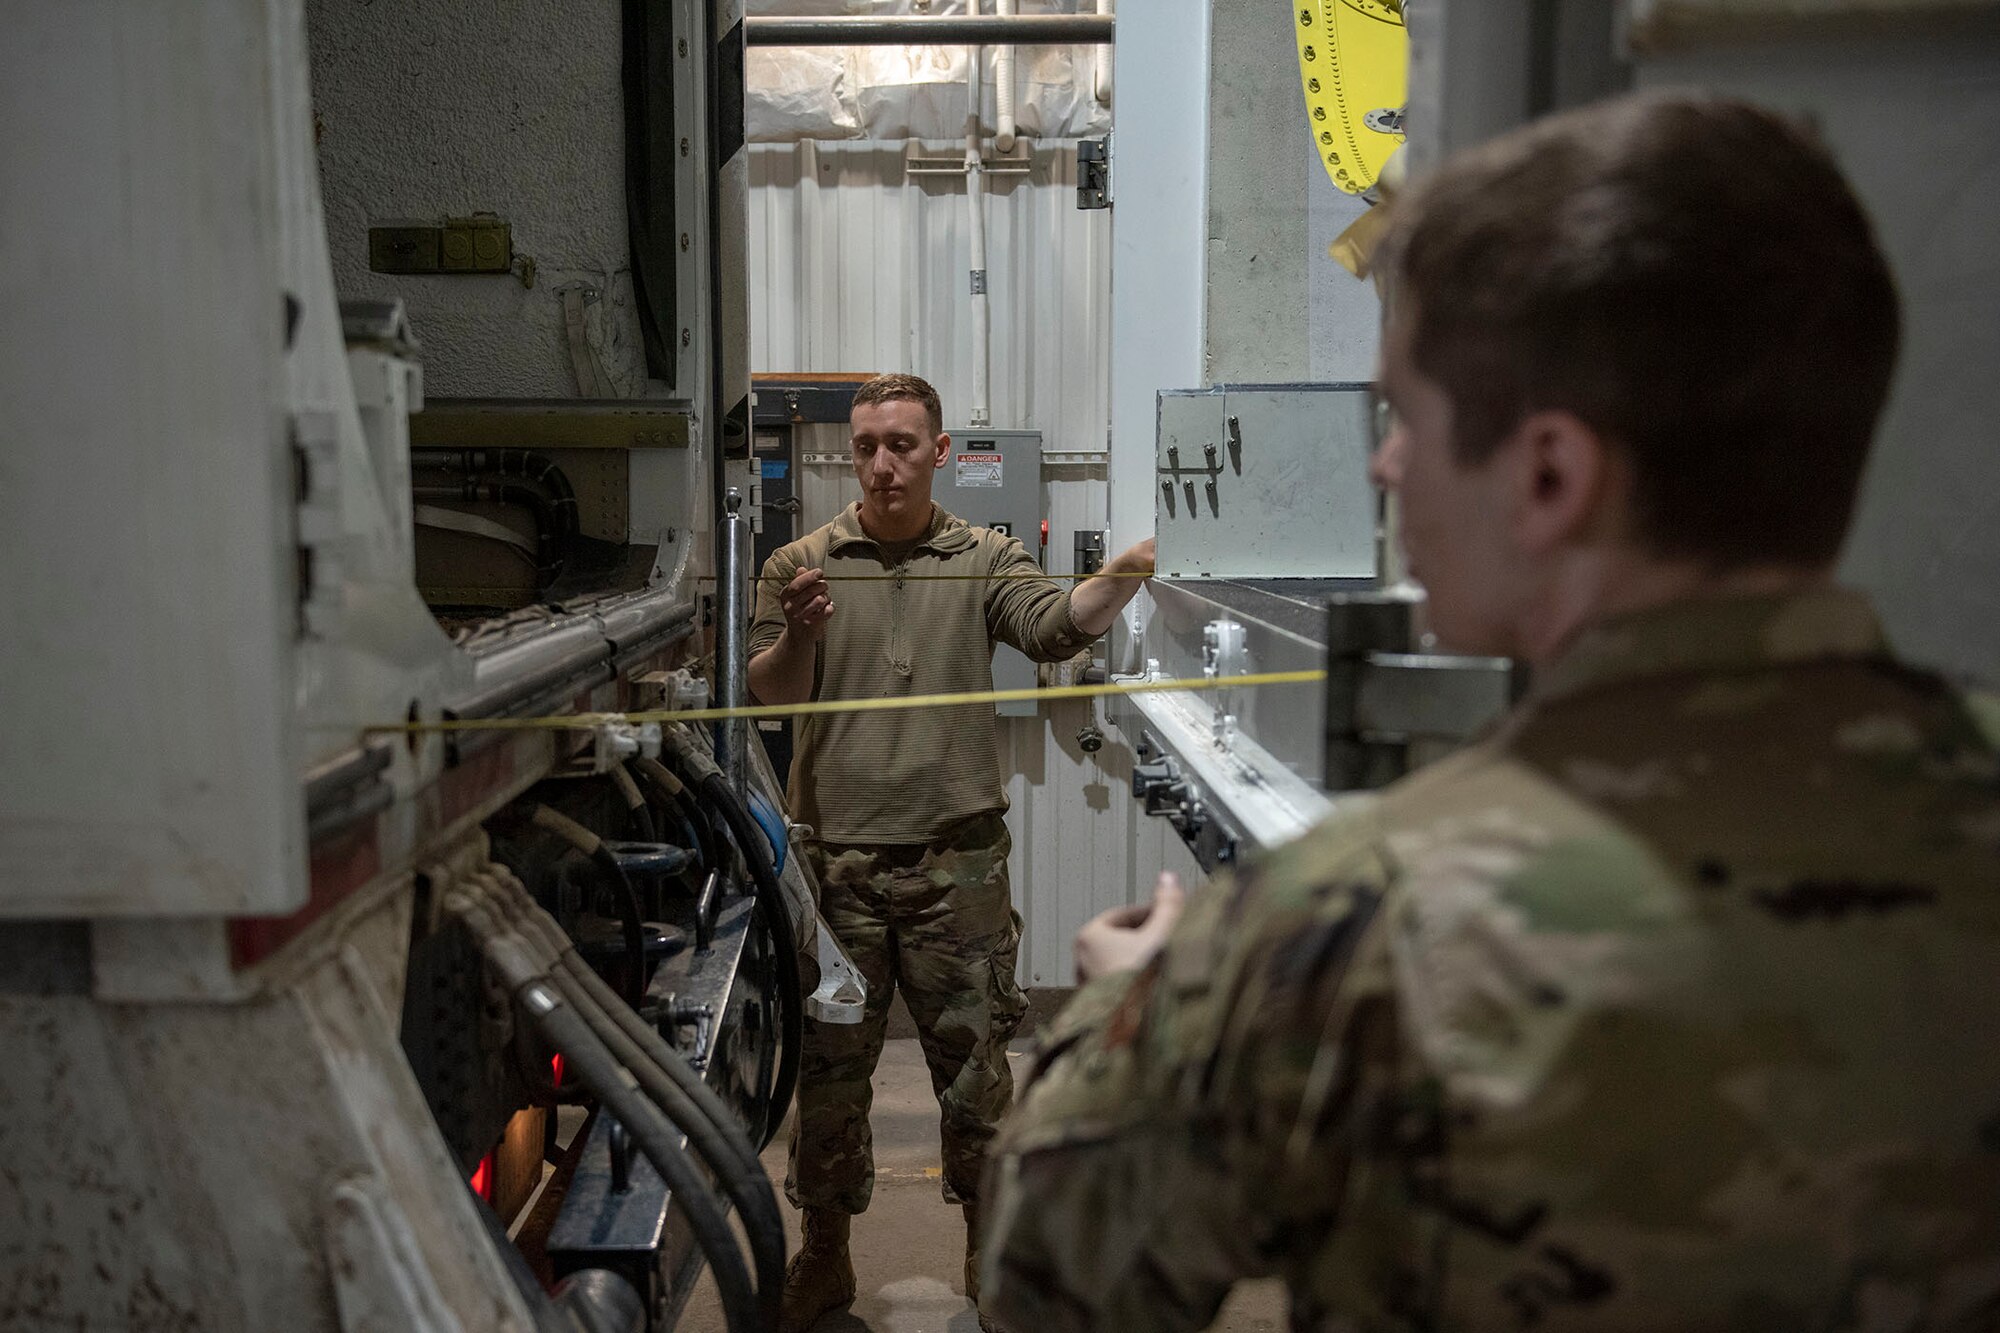 Two Airmen measure the distance with tape measures two transporter vehicles before the start of a missile roll transfer.